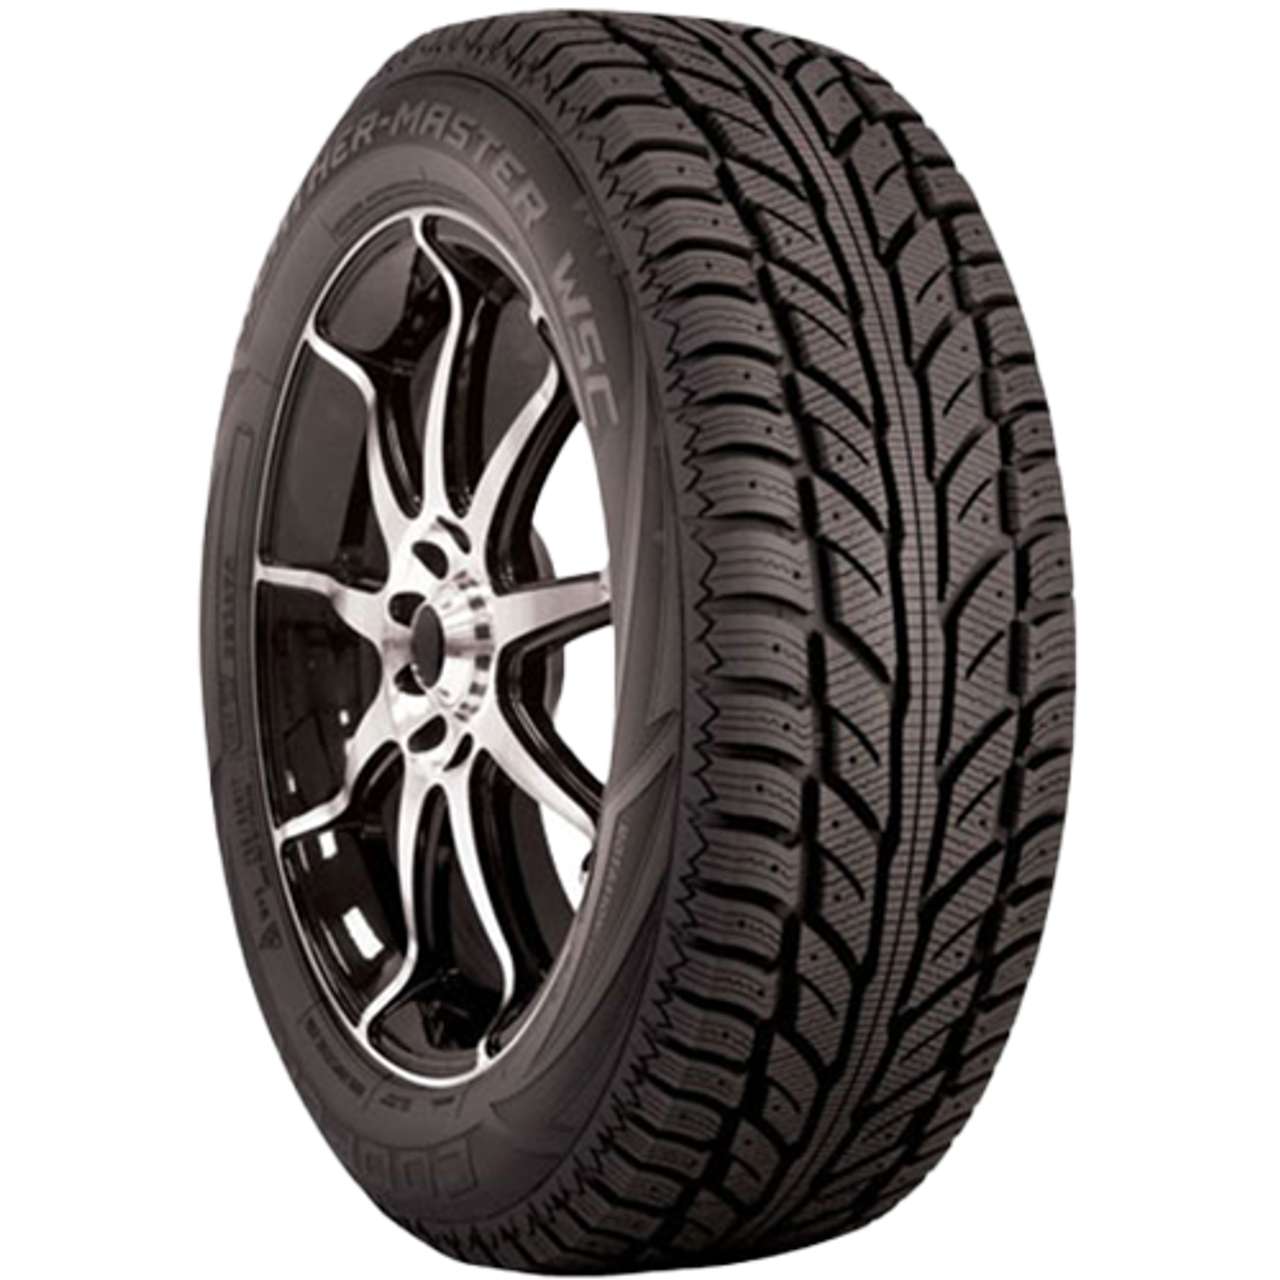 COOPER WEATHERMASTER WSC 255/50R19 107T STUDDABLE BSW XL